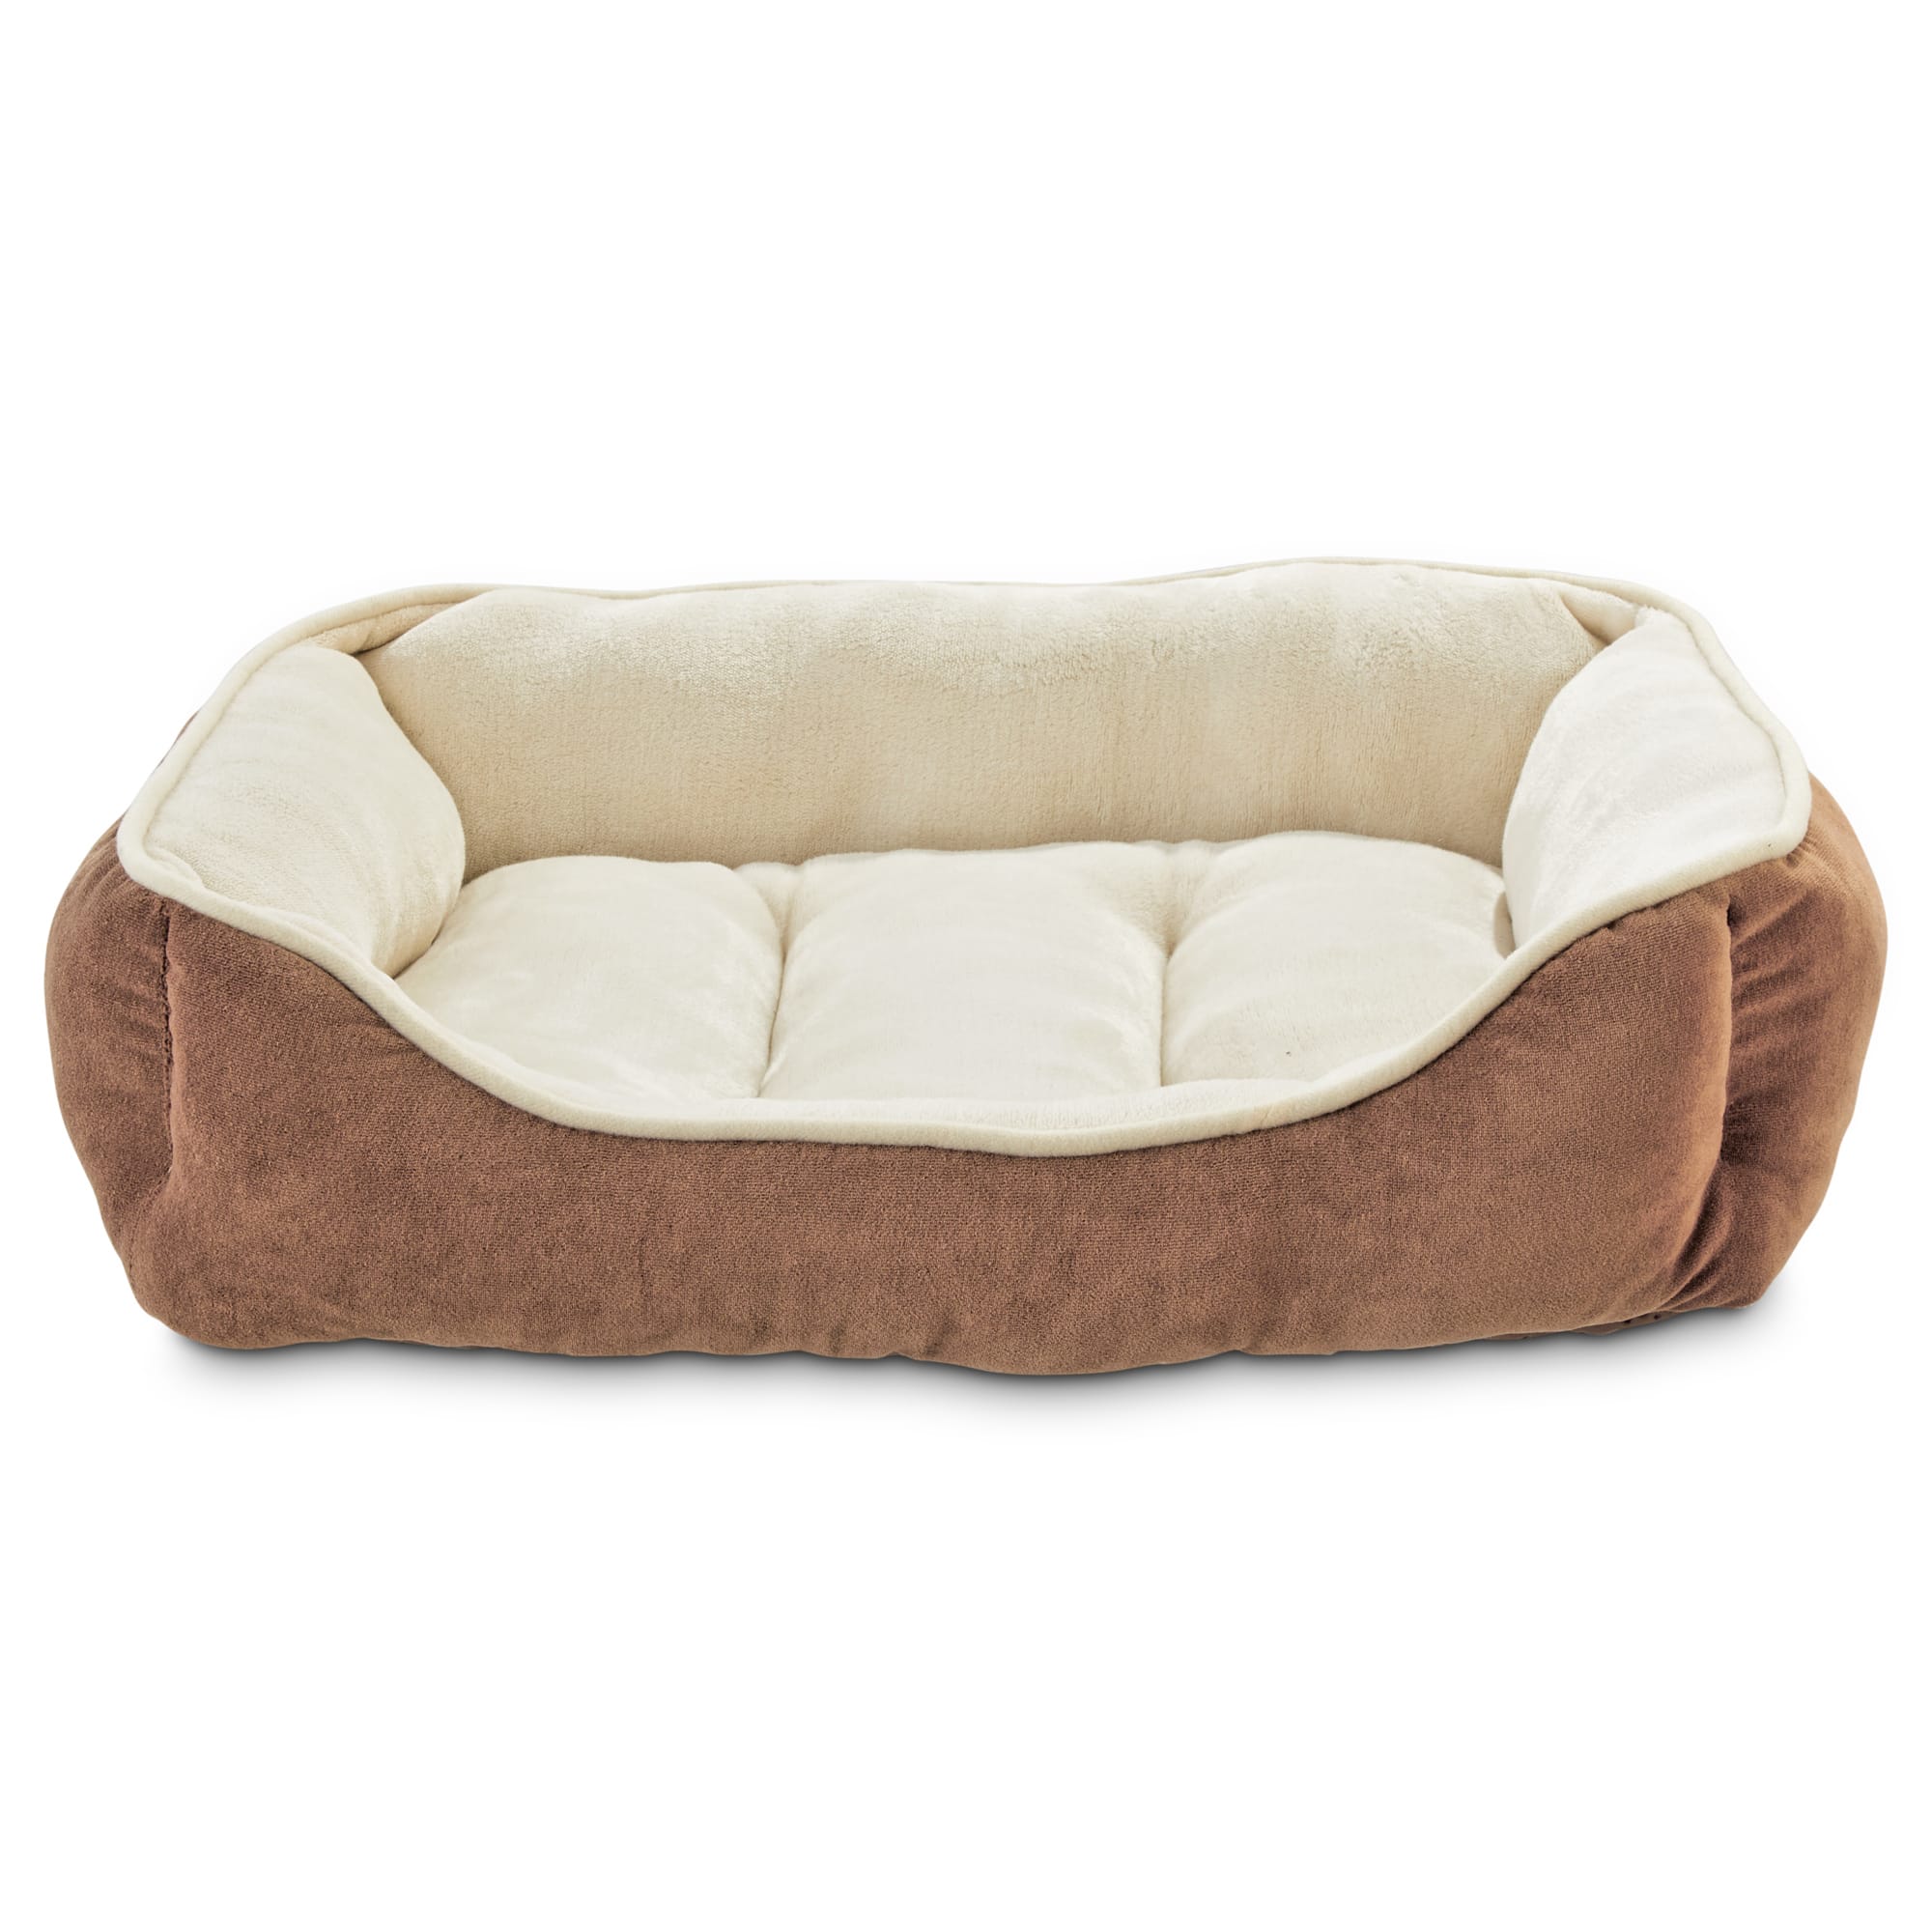 Everyyay Essentials Snooze Fest Rectangle Nester Dog Bed 24 L X 18 W